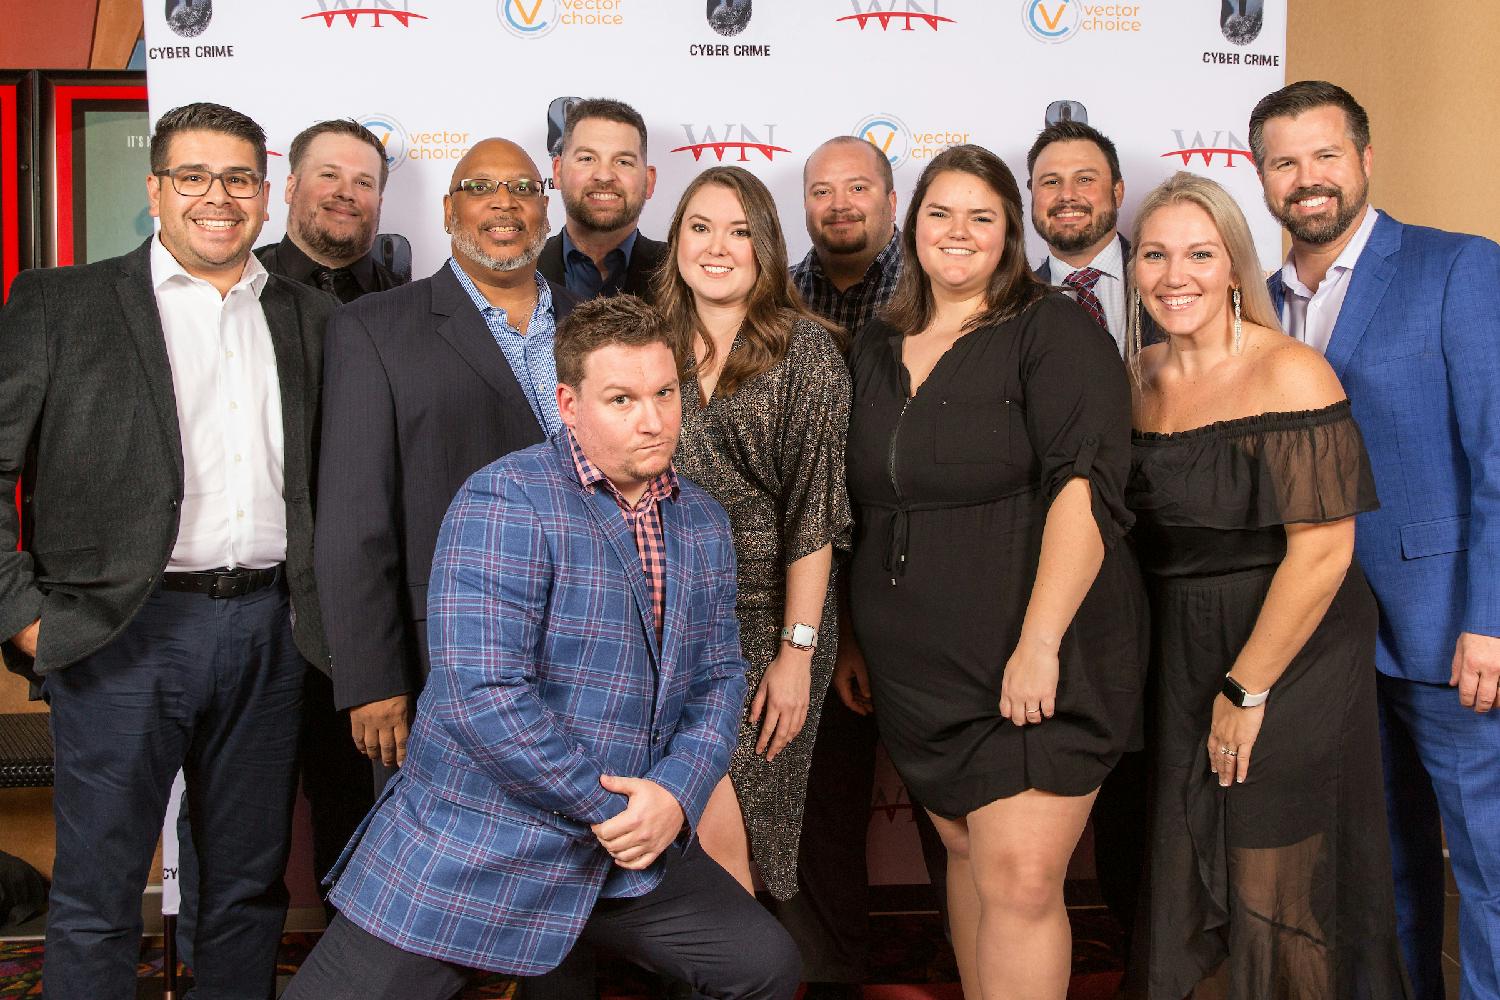 Part of the team from 2019 together for CEO Will Nobles' movie premiere for Cyber Crime.